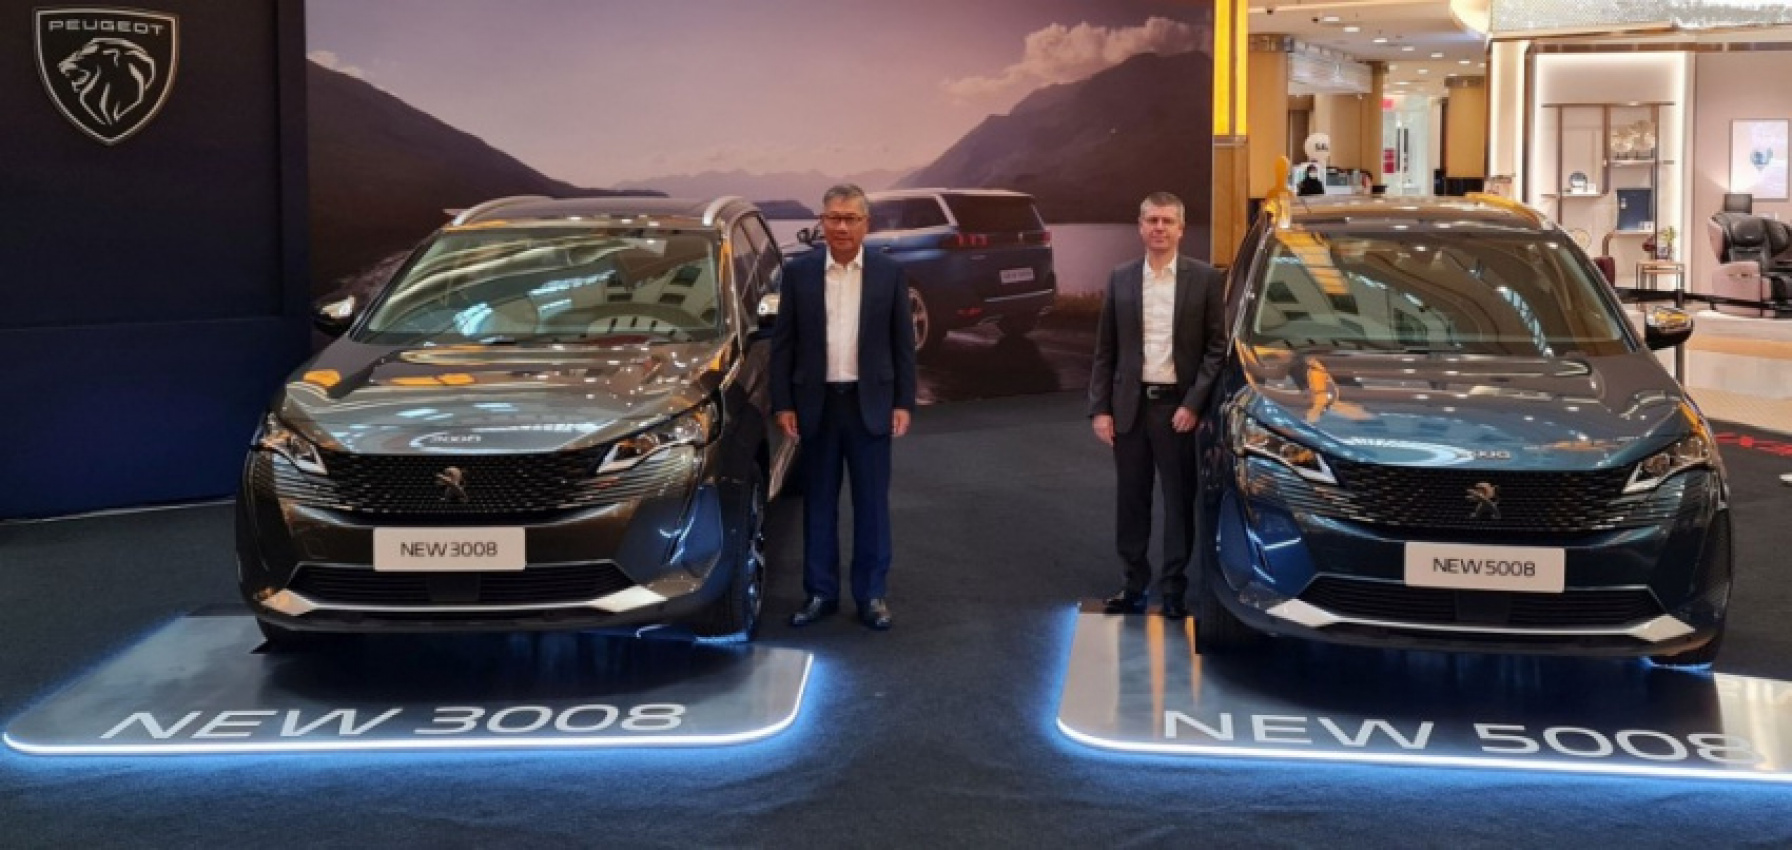 autos, cars, geo, peugeot, amazon, android, autos peugeot, peugeot 3008, amazon, android, new peugeot 3008 and 5008 suvs launched, price starts from rm162k